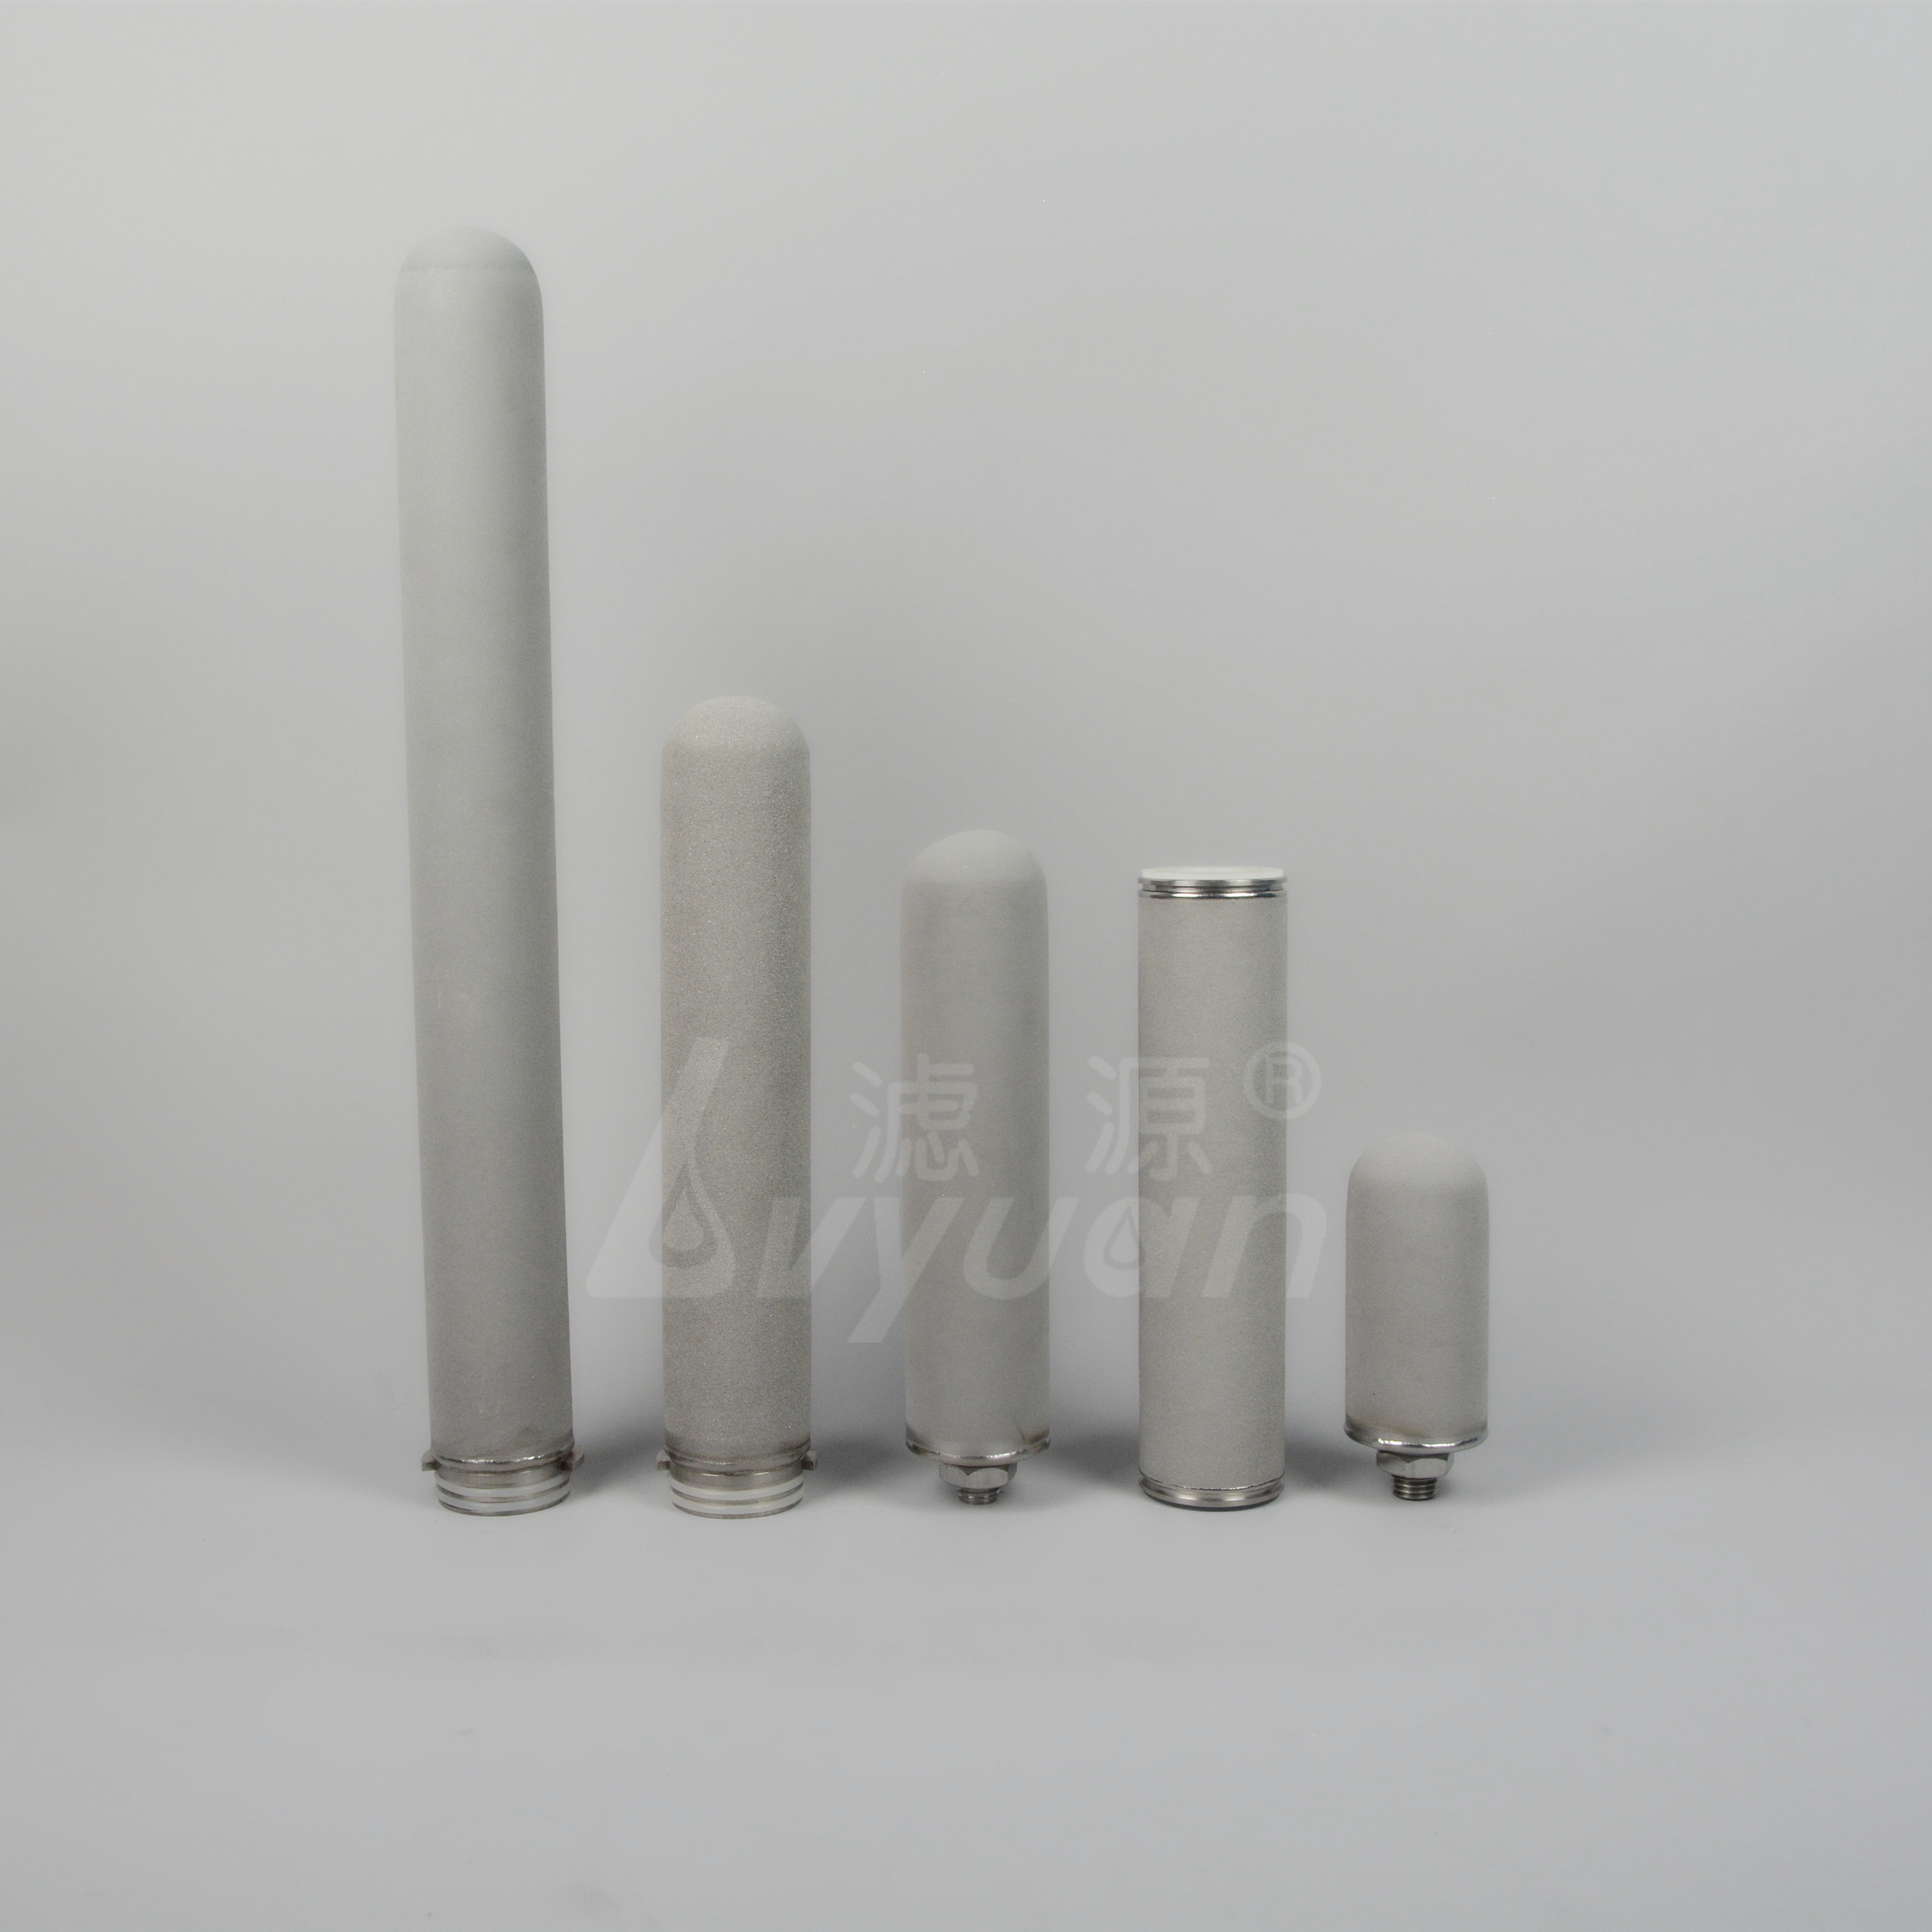 The 20'' Standard Titanium Porous Filter Tube For Filtration Customized  Suppliers, Manufacturers - Free Sample - YINGGAO